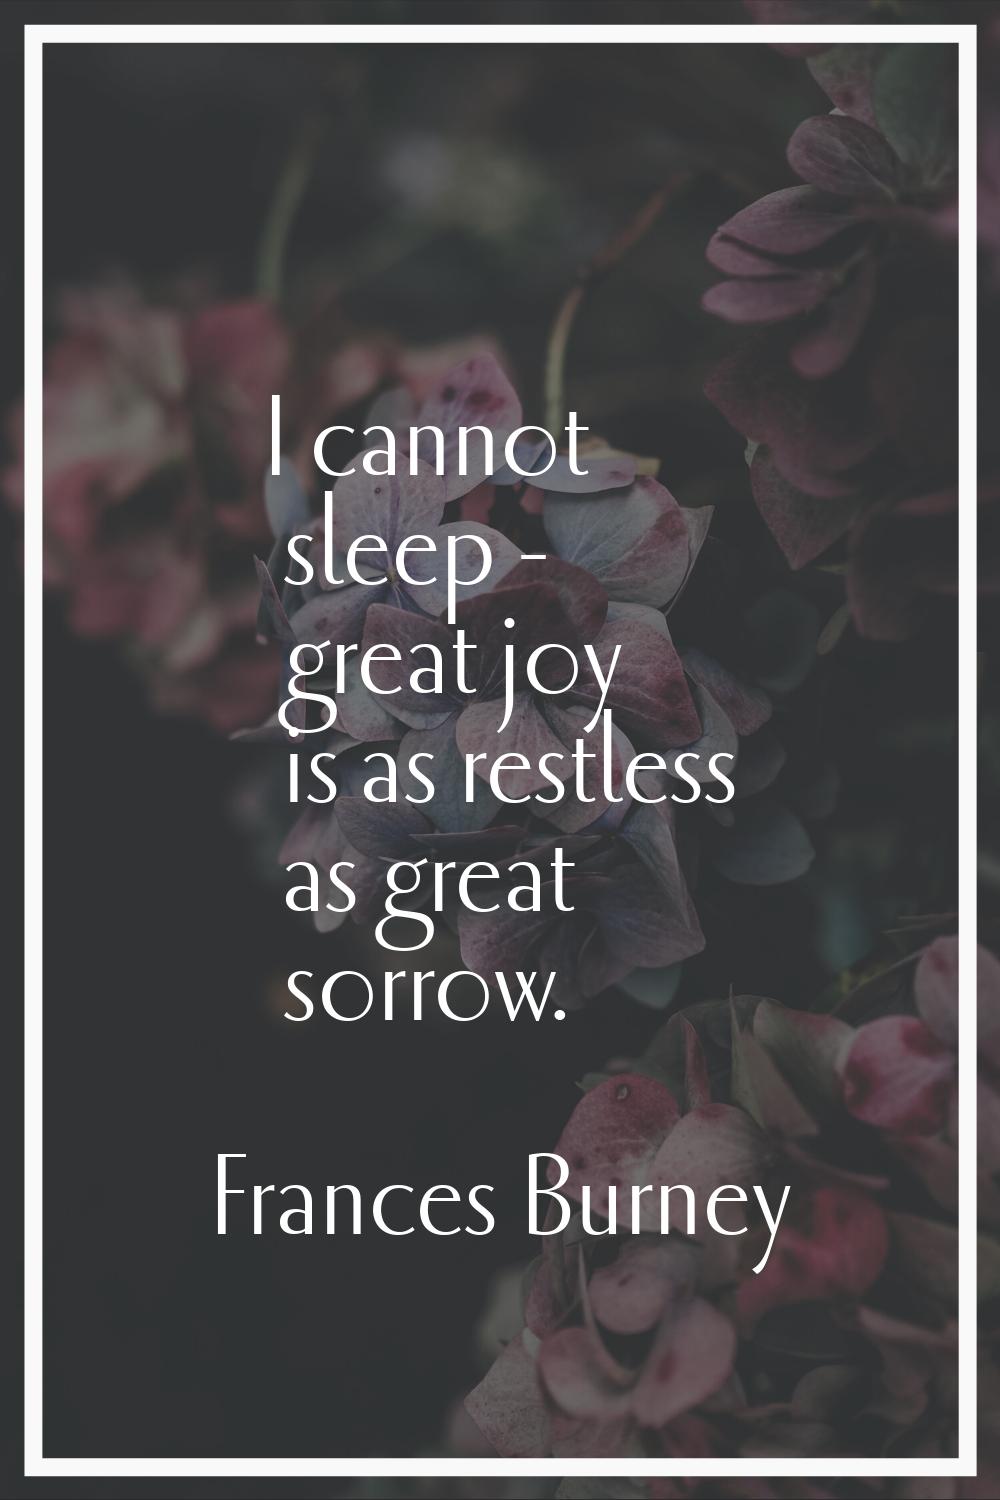 I cannot sleep - great joy is as restless as great sorrow.